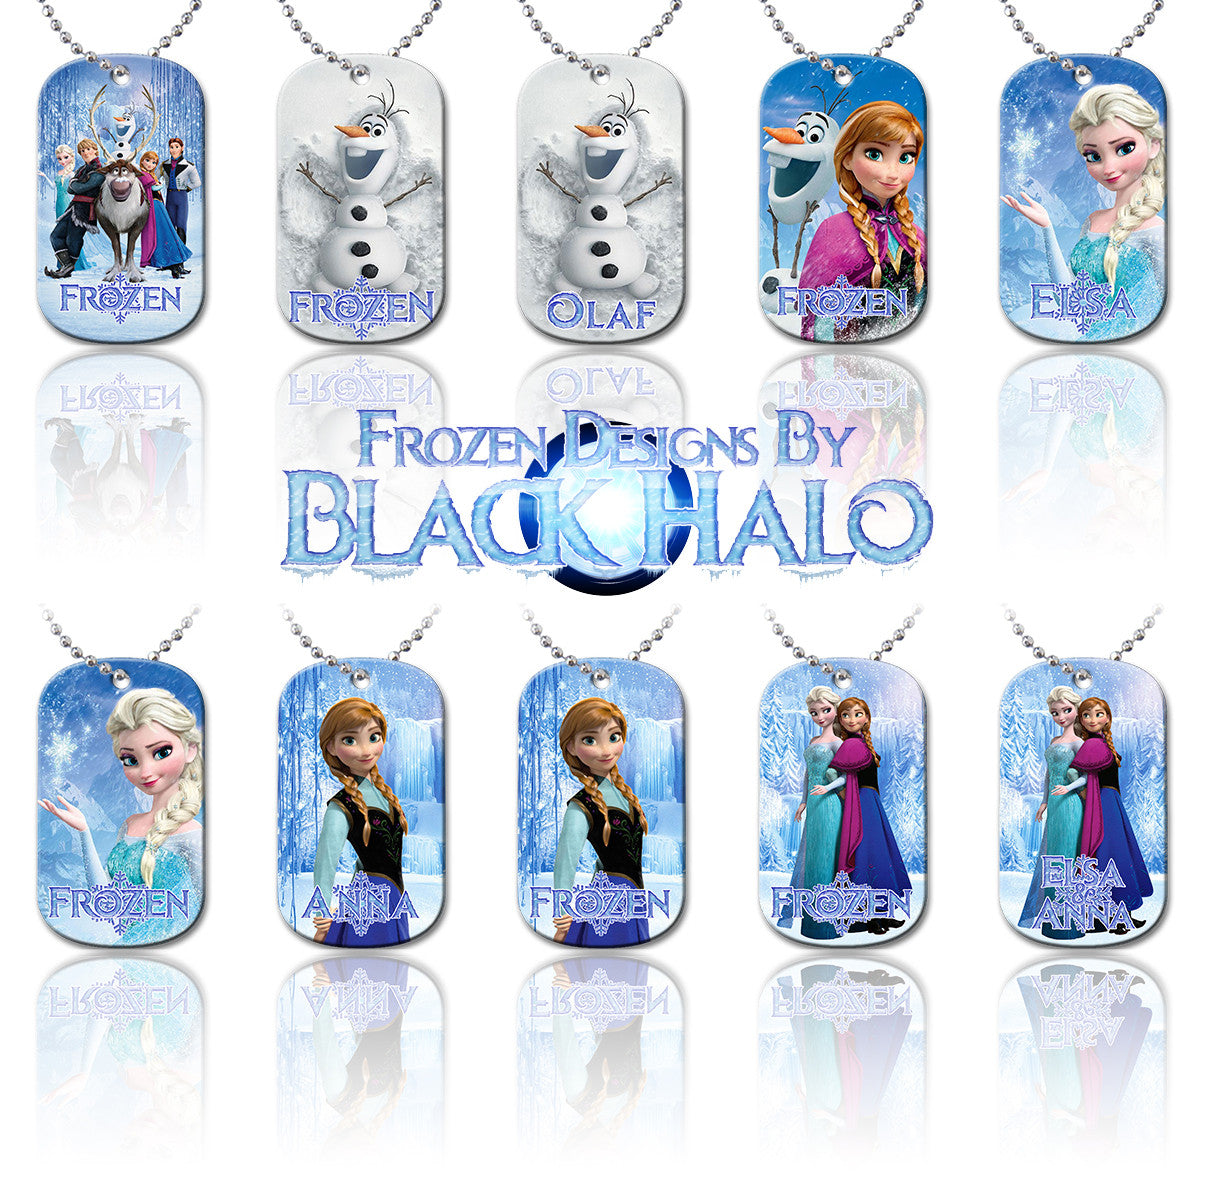 Choice of Disneys Frozen Double Sided Metal Pendant With Metal Ball Chain Necklace (Dog Tag) - Black Halo Design
 - 1